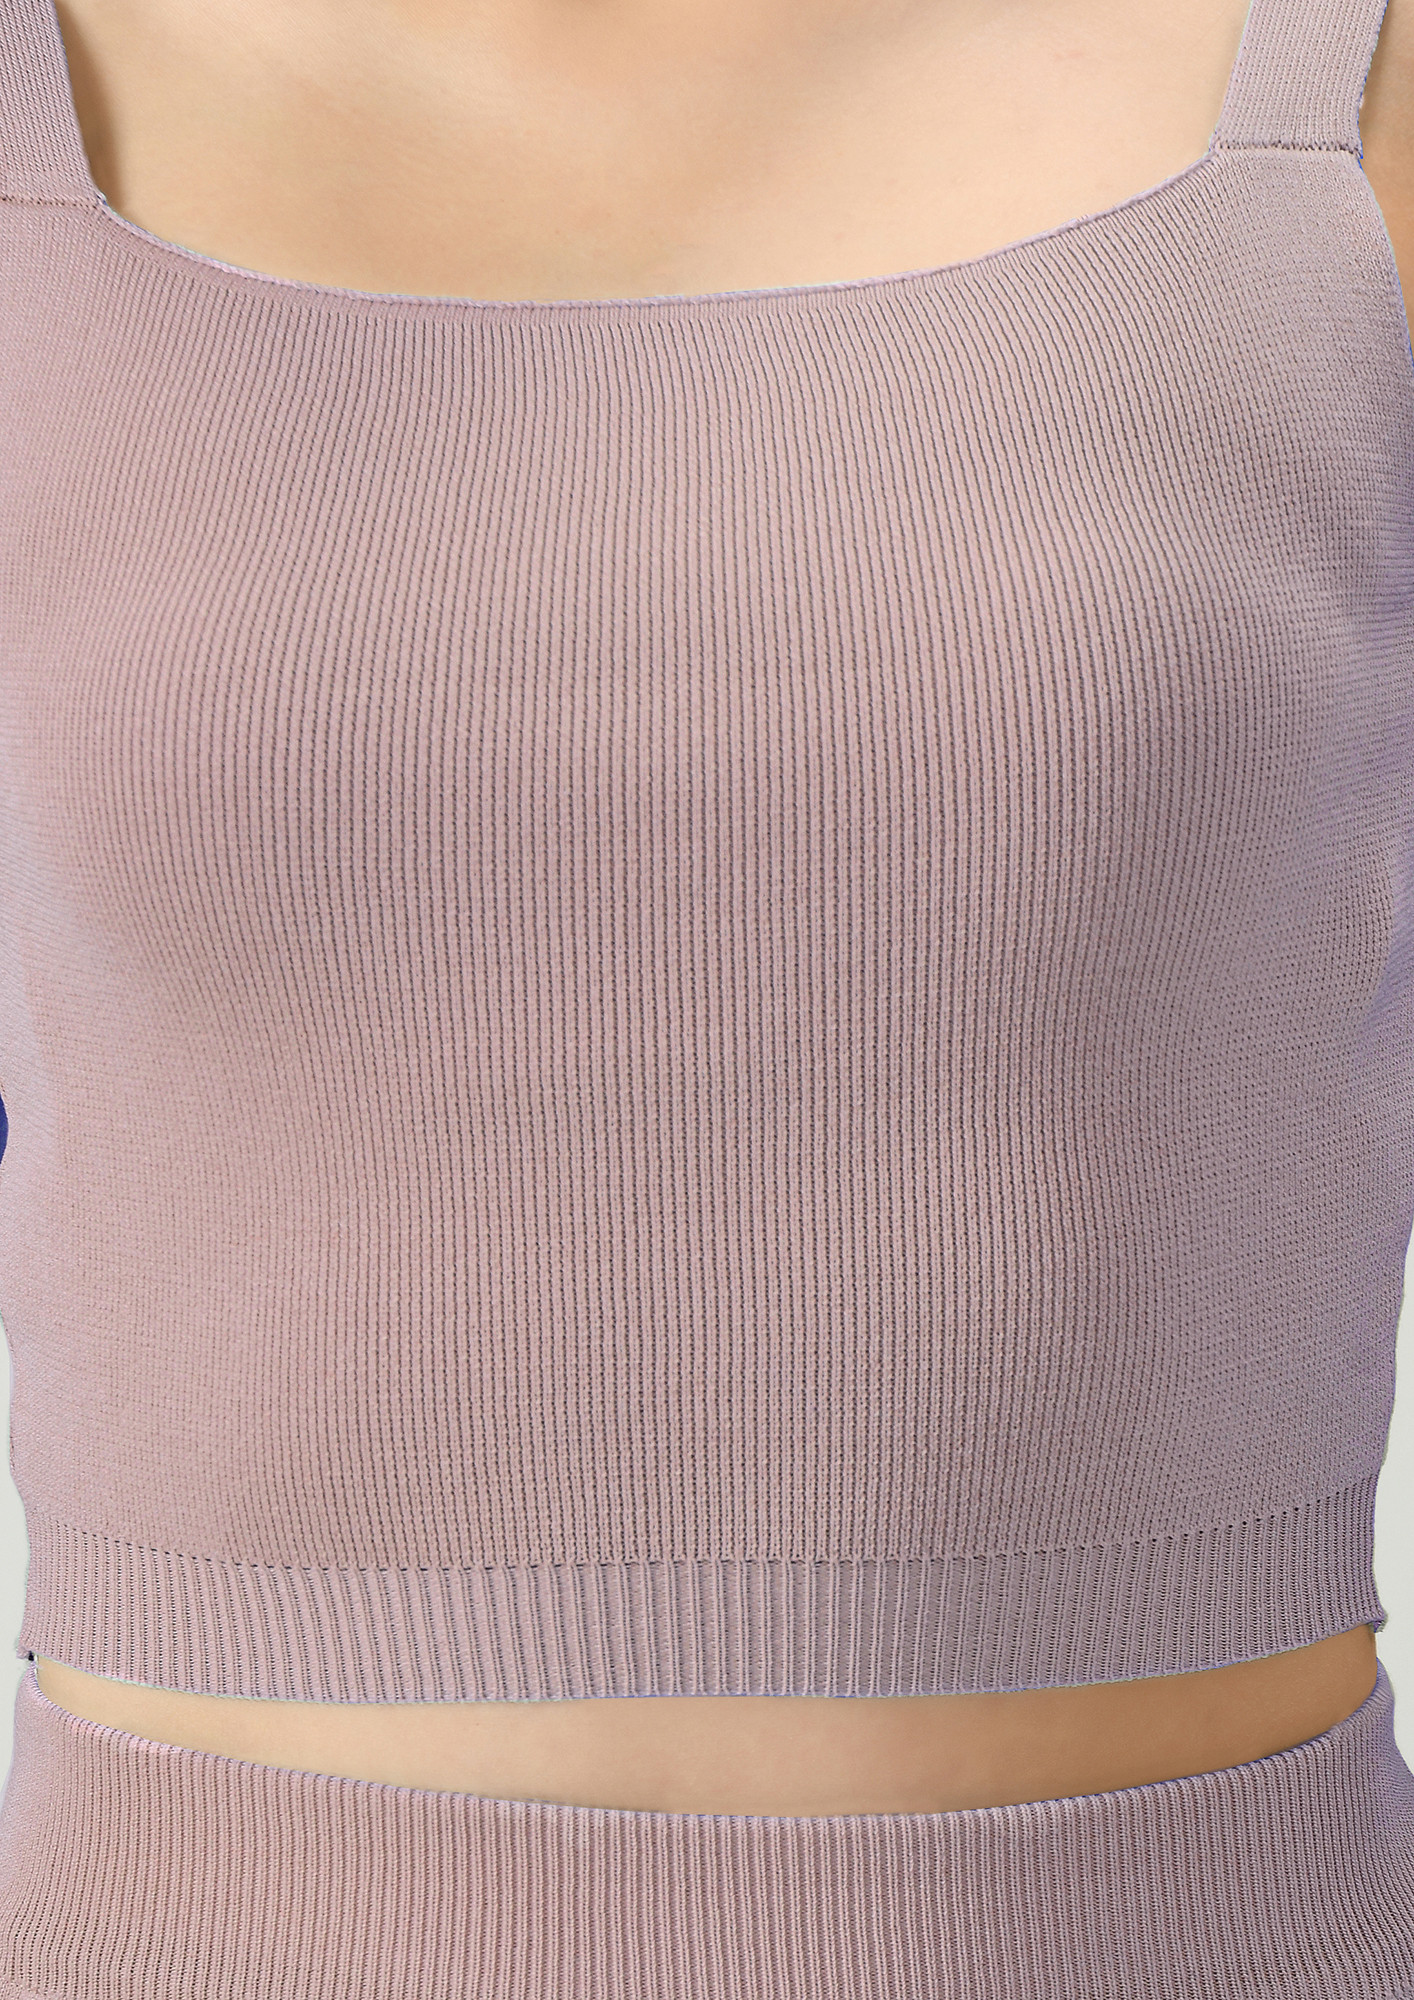 Lavender Sweater Set - Ribbed Cardigan Sweater - Cropped Cami Top - Lulus